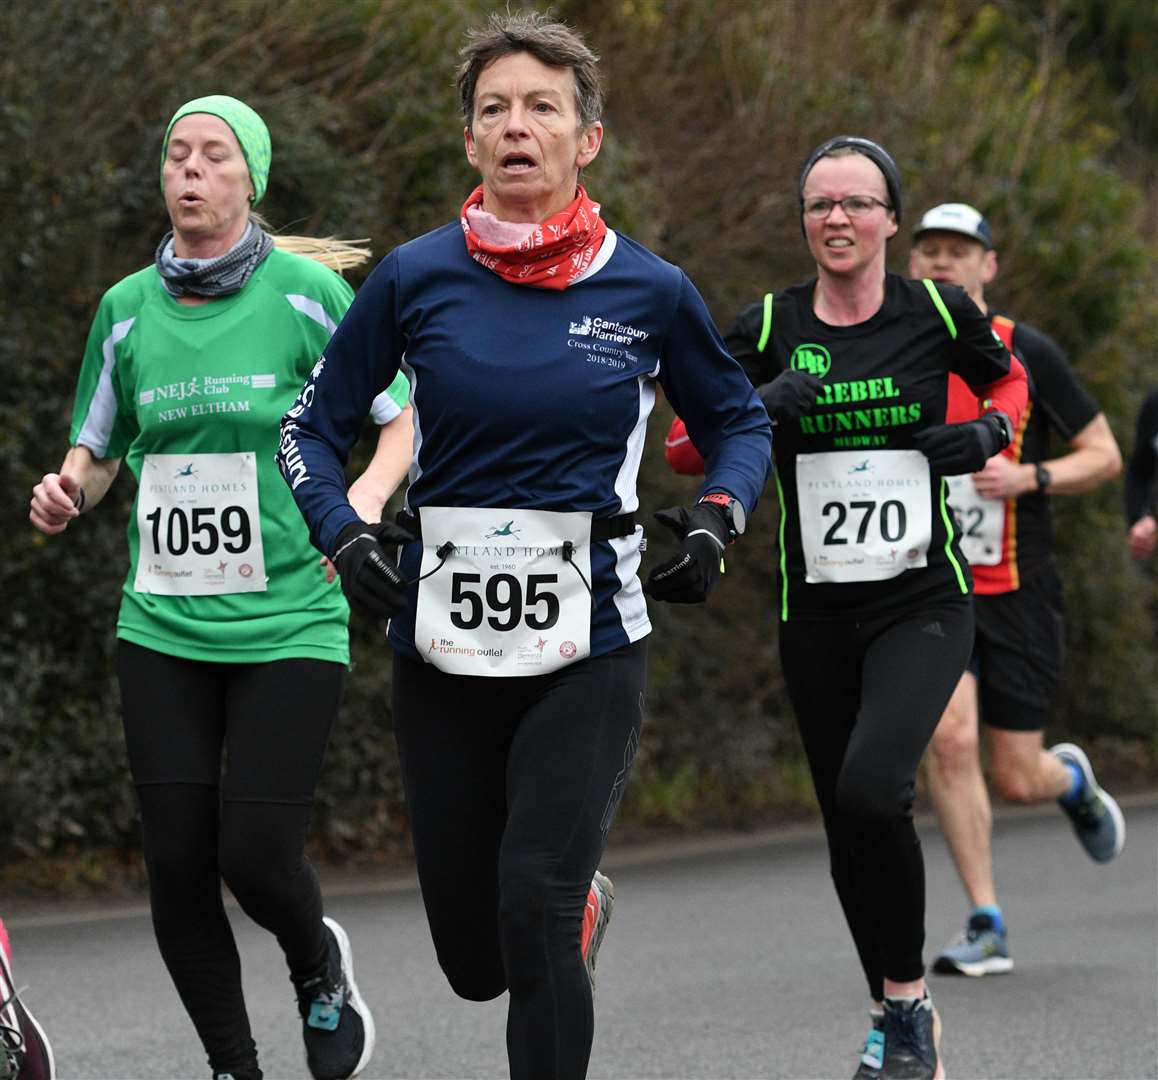 No.1059 Kelly Harris battles No.595 Claire Pluckrose of Canterbury Harriers and No.270 Sally Fry of Rebel Runners Medway. Picture: Barry Goodwin (54455330)